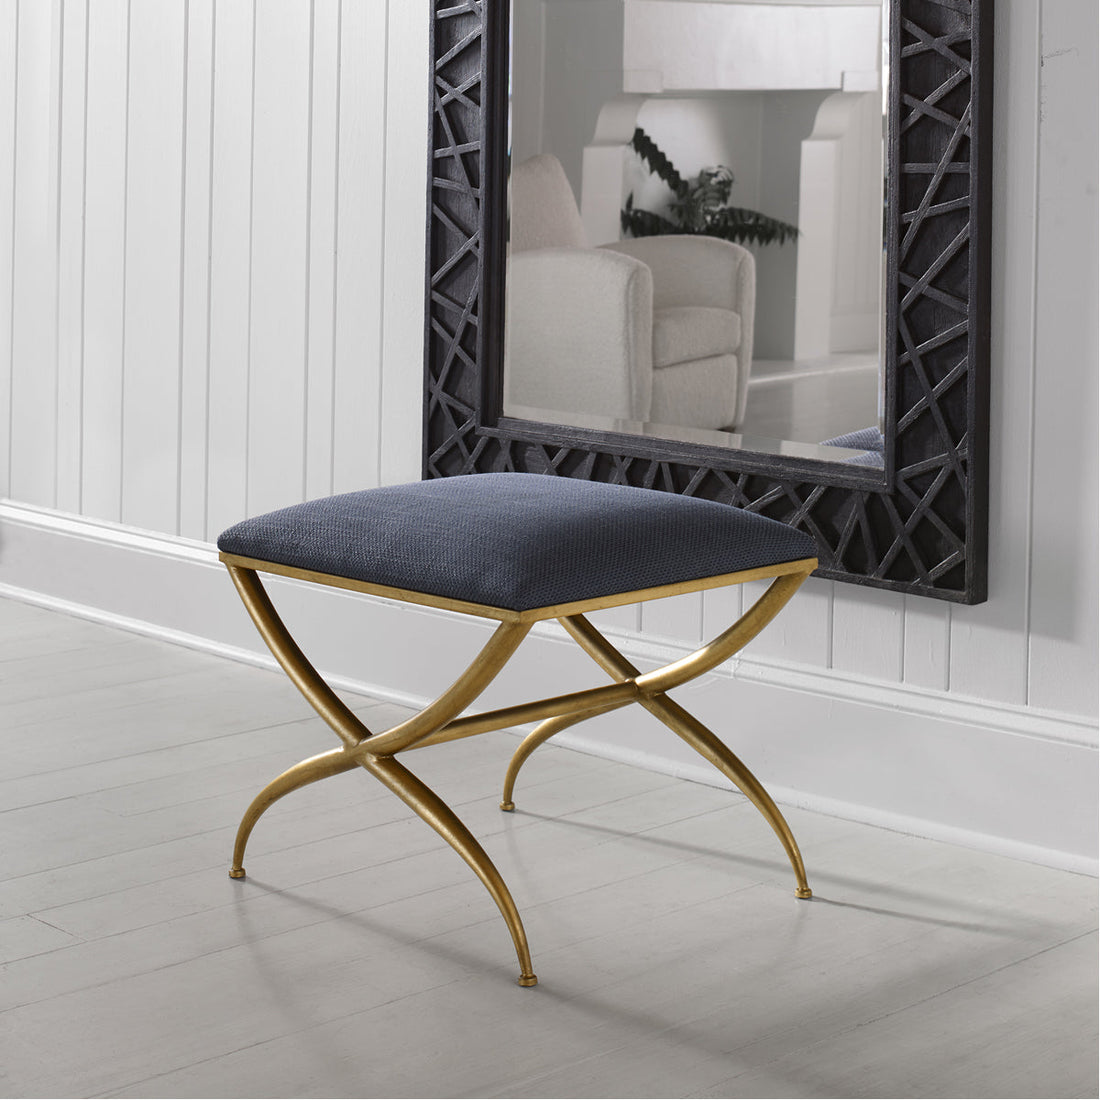 Uttermost Crossing Small Bench